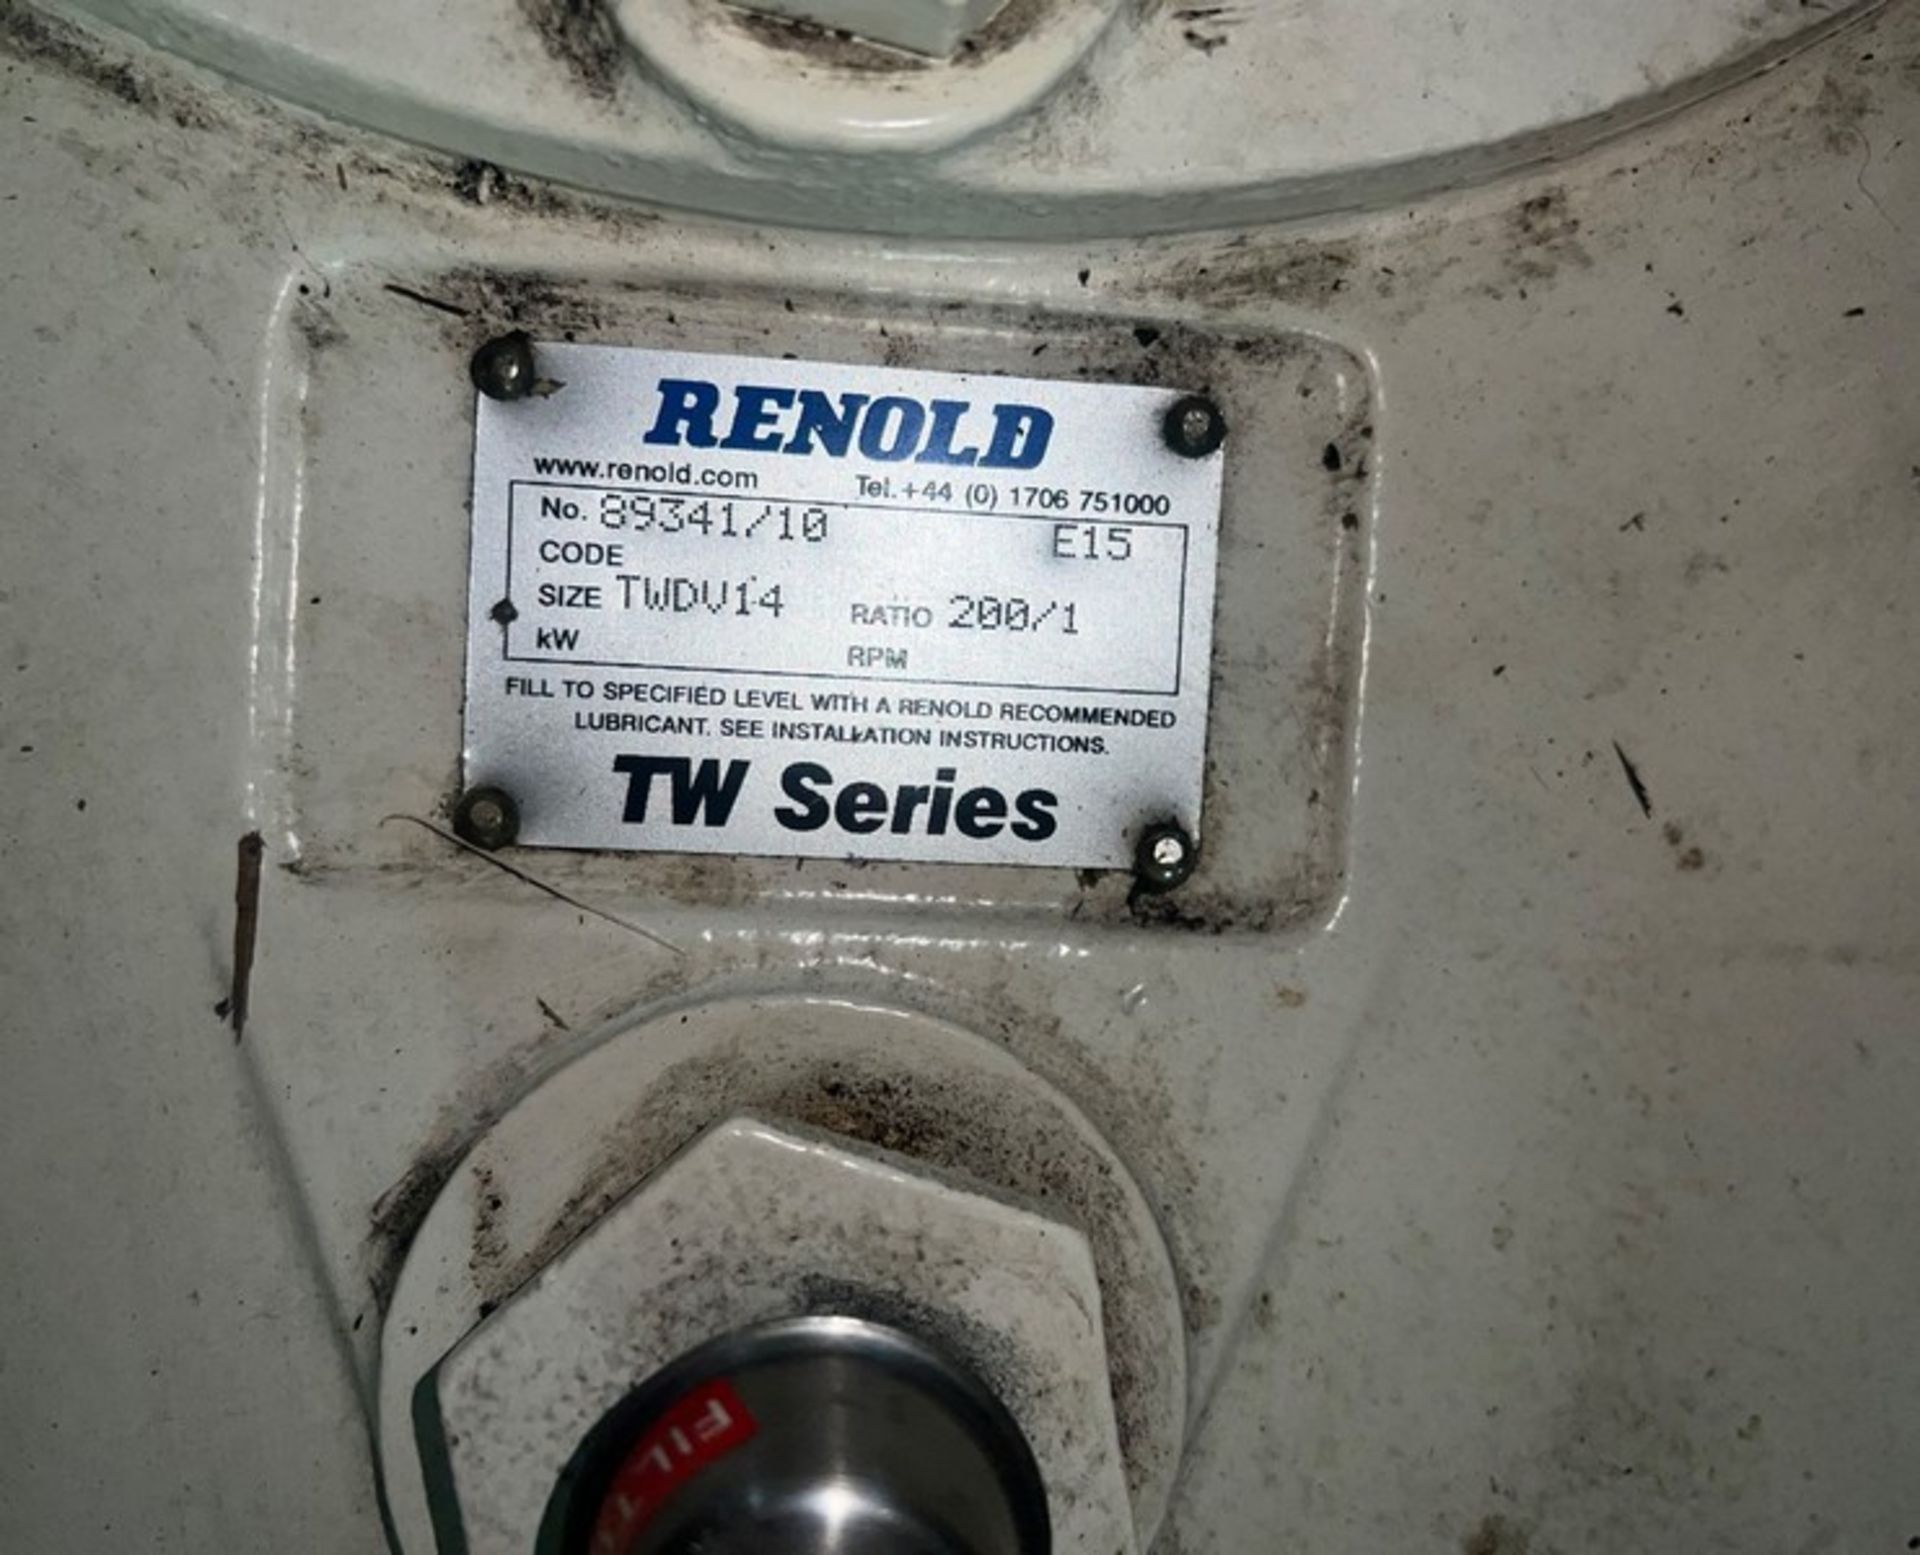 Never used Renold TW Series 200 to 1 Gear Ratio. 50" x 42" heavy unit. Free RIGGING INCLUDED WITH - Image 3 of 6